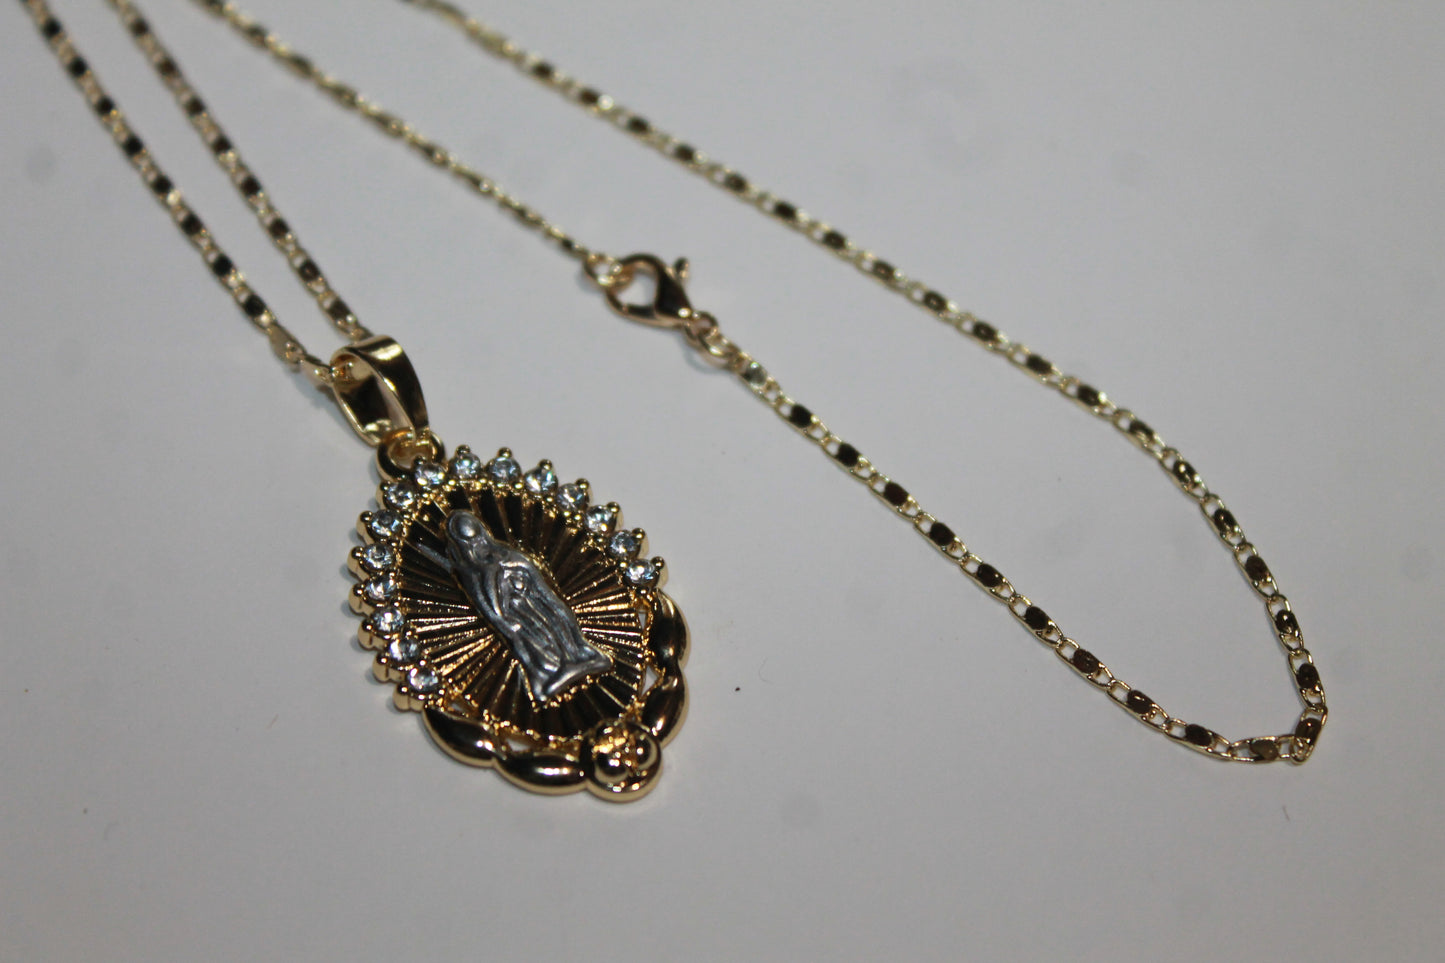 VIRGIN MARY GOLD NECKLACE